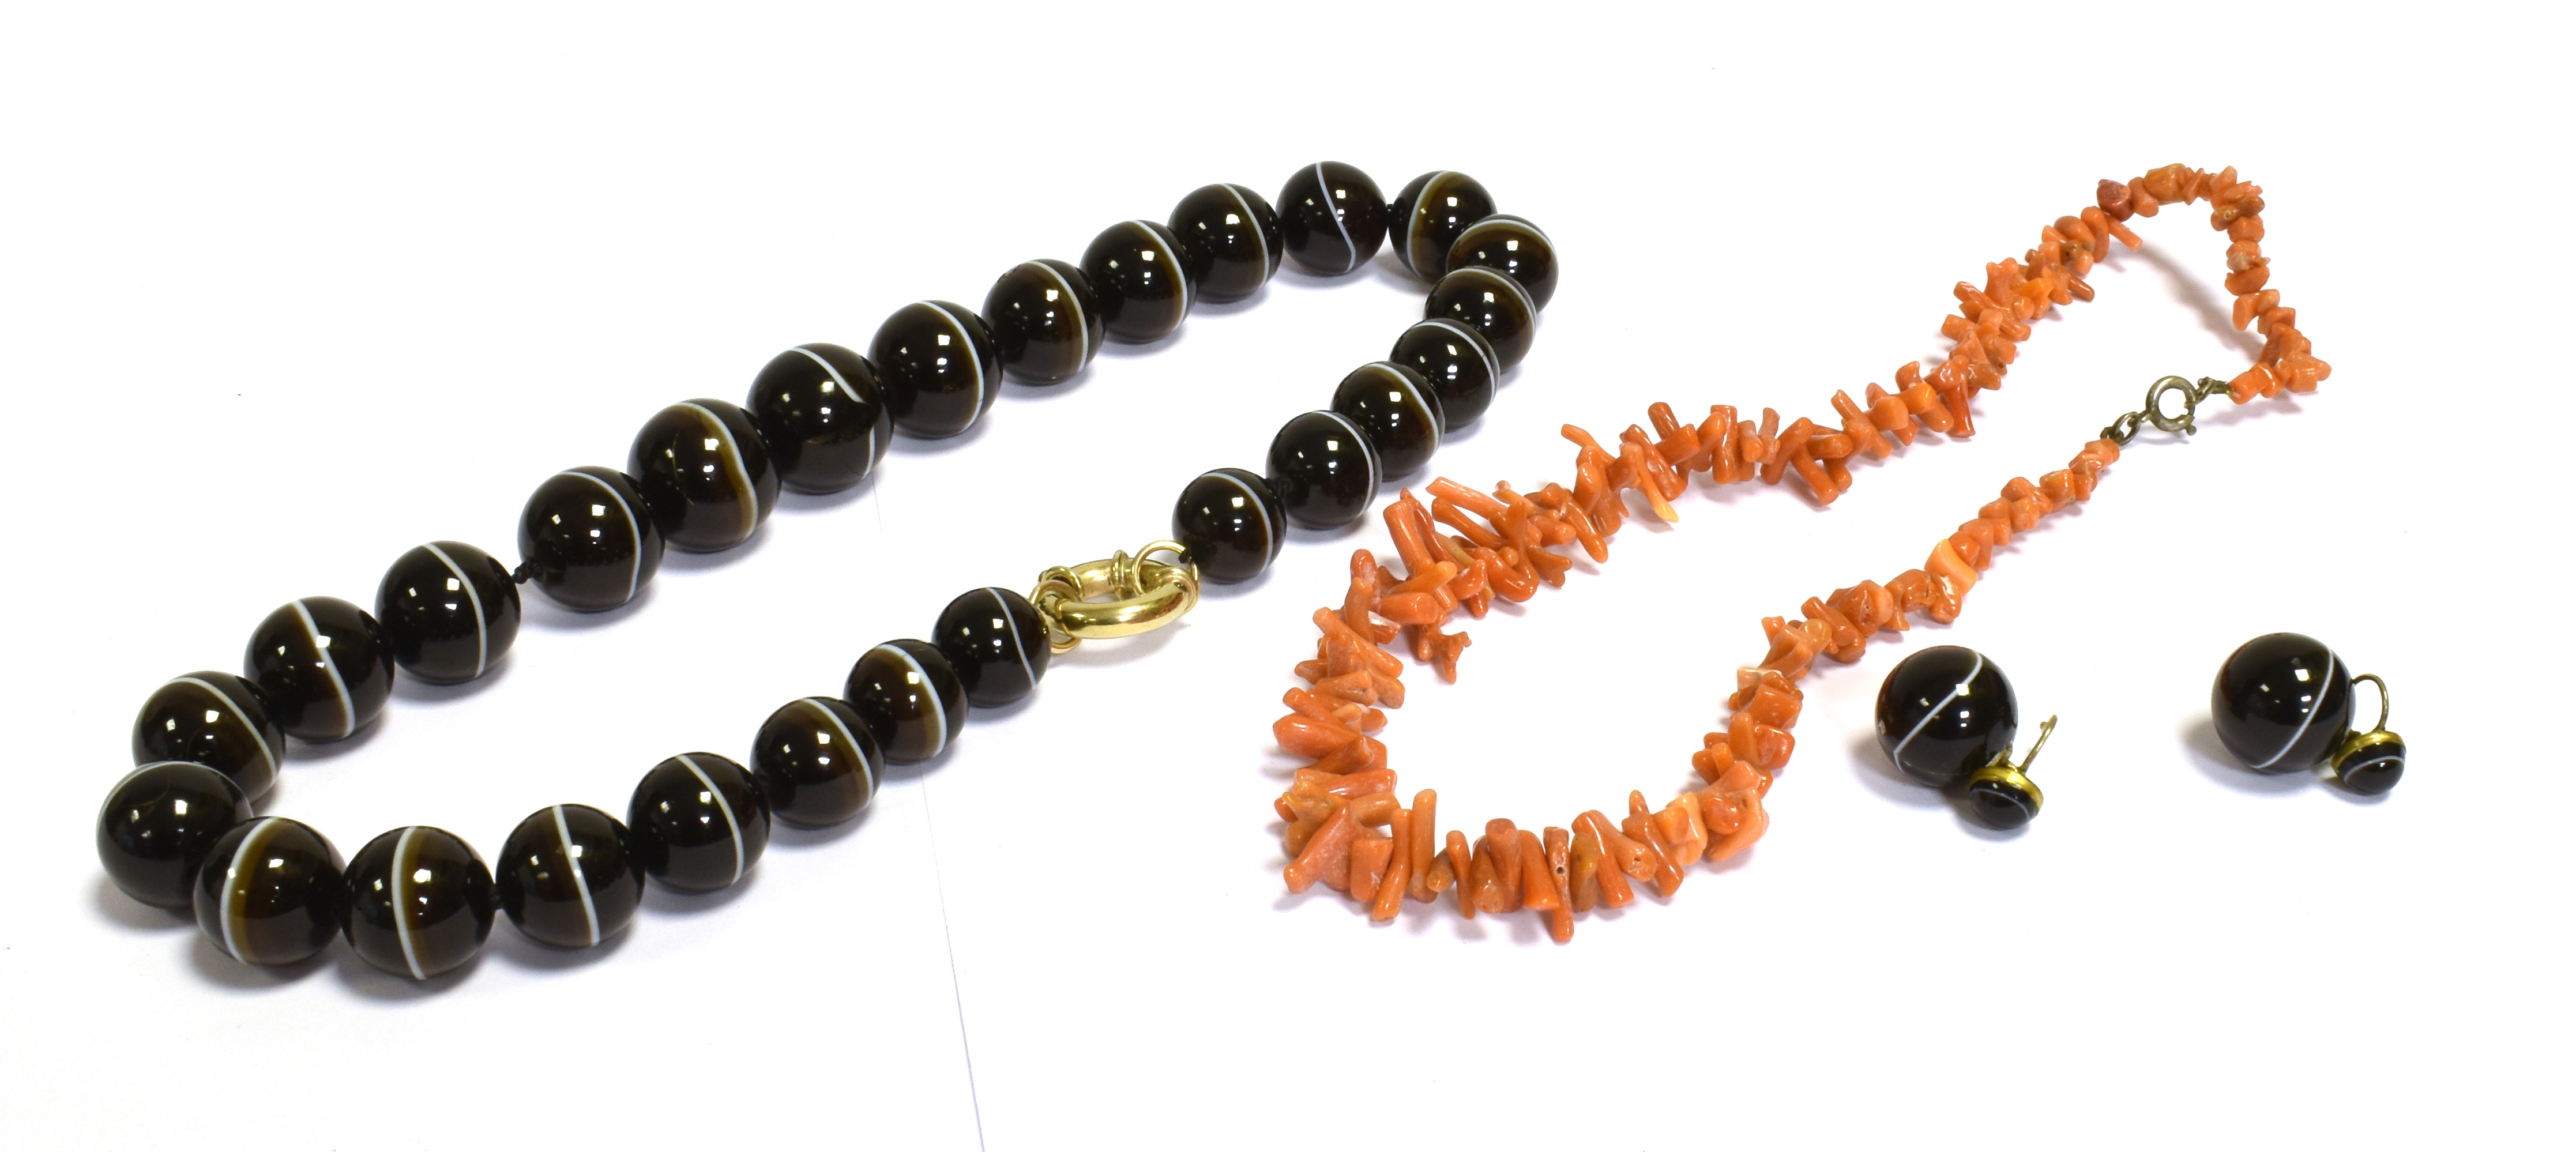 VICTORIAN BANDED AGATE & CORAL NECKLACES Bulls eye banded agate bead necklace 42cm long, beads